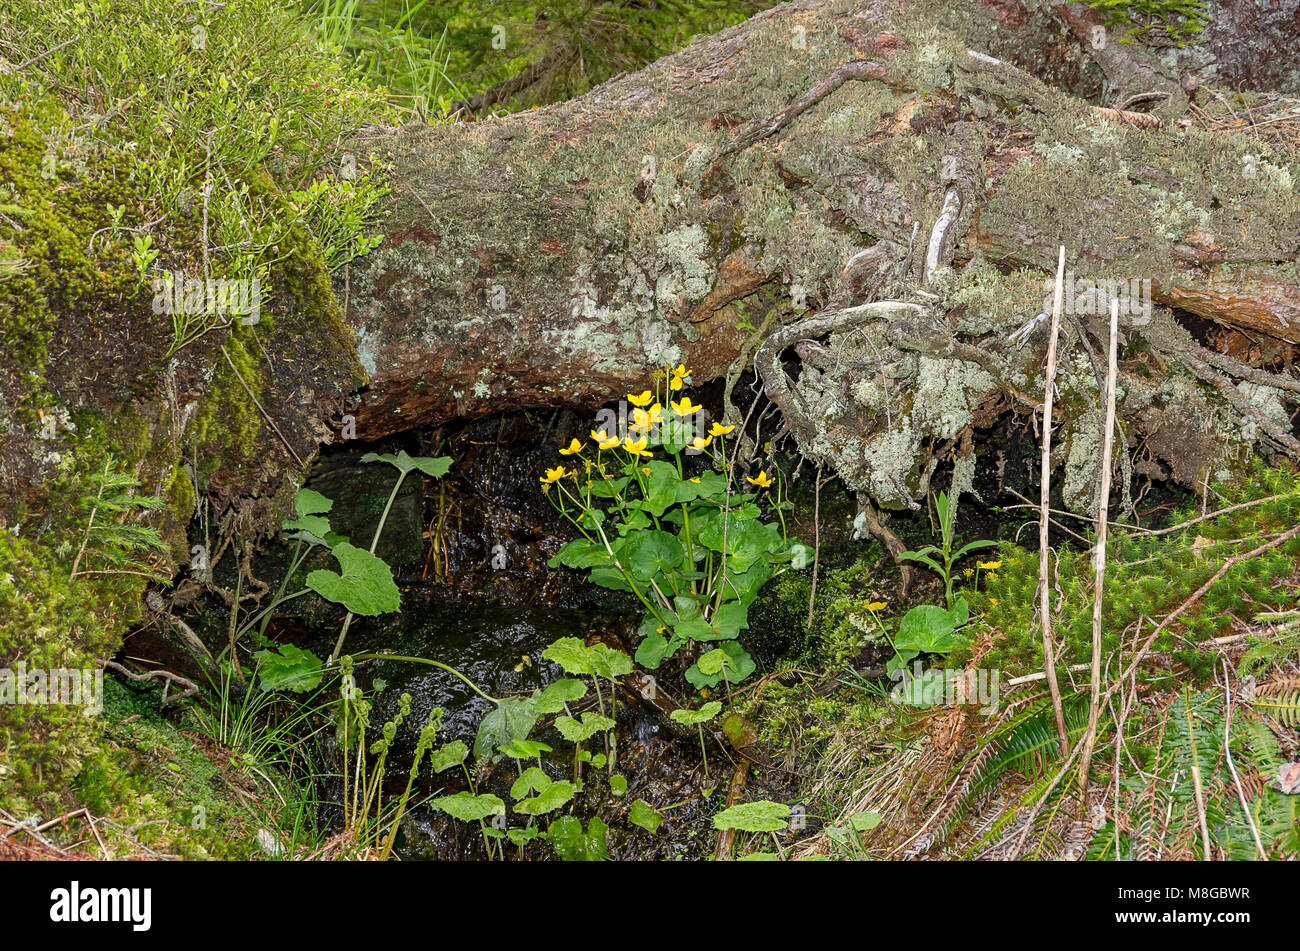 Marsh marigolds at a small watercourse in the area of the Großer Arber, Bavarian Forest, Bavaria, Germany. Stock Photo